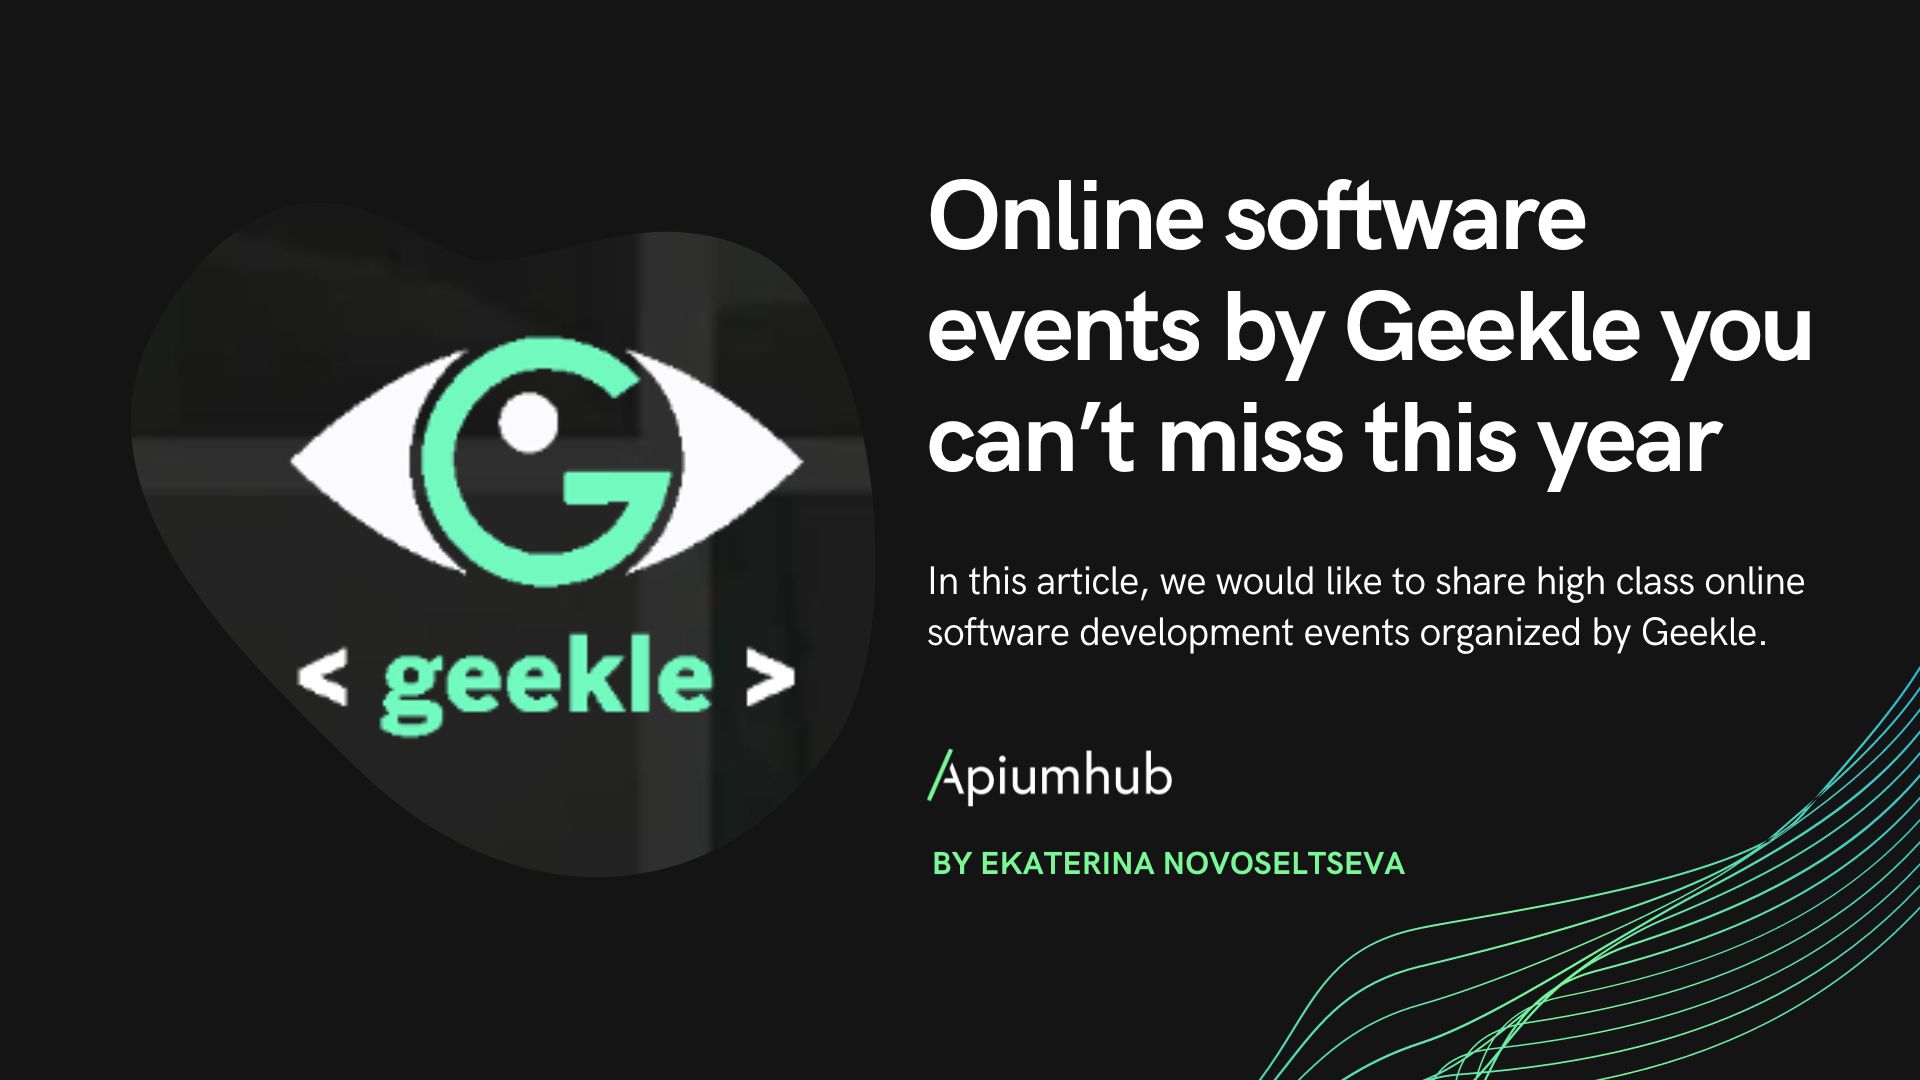 Online software events by Geekle you can't miss this year